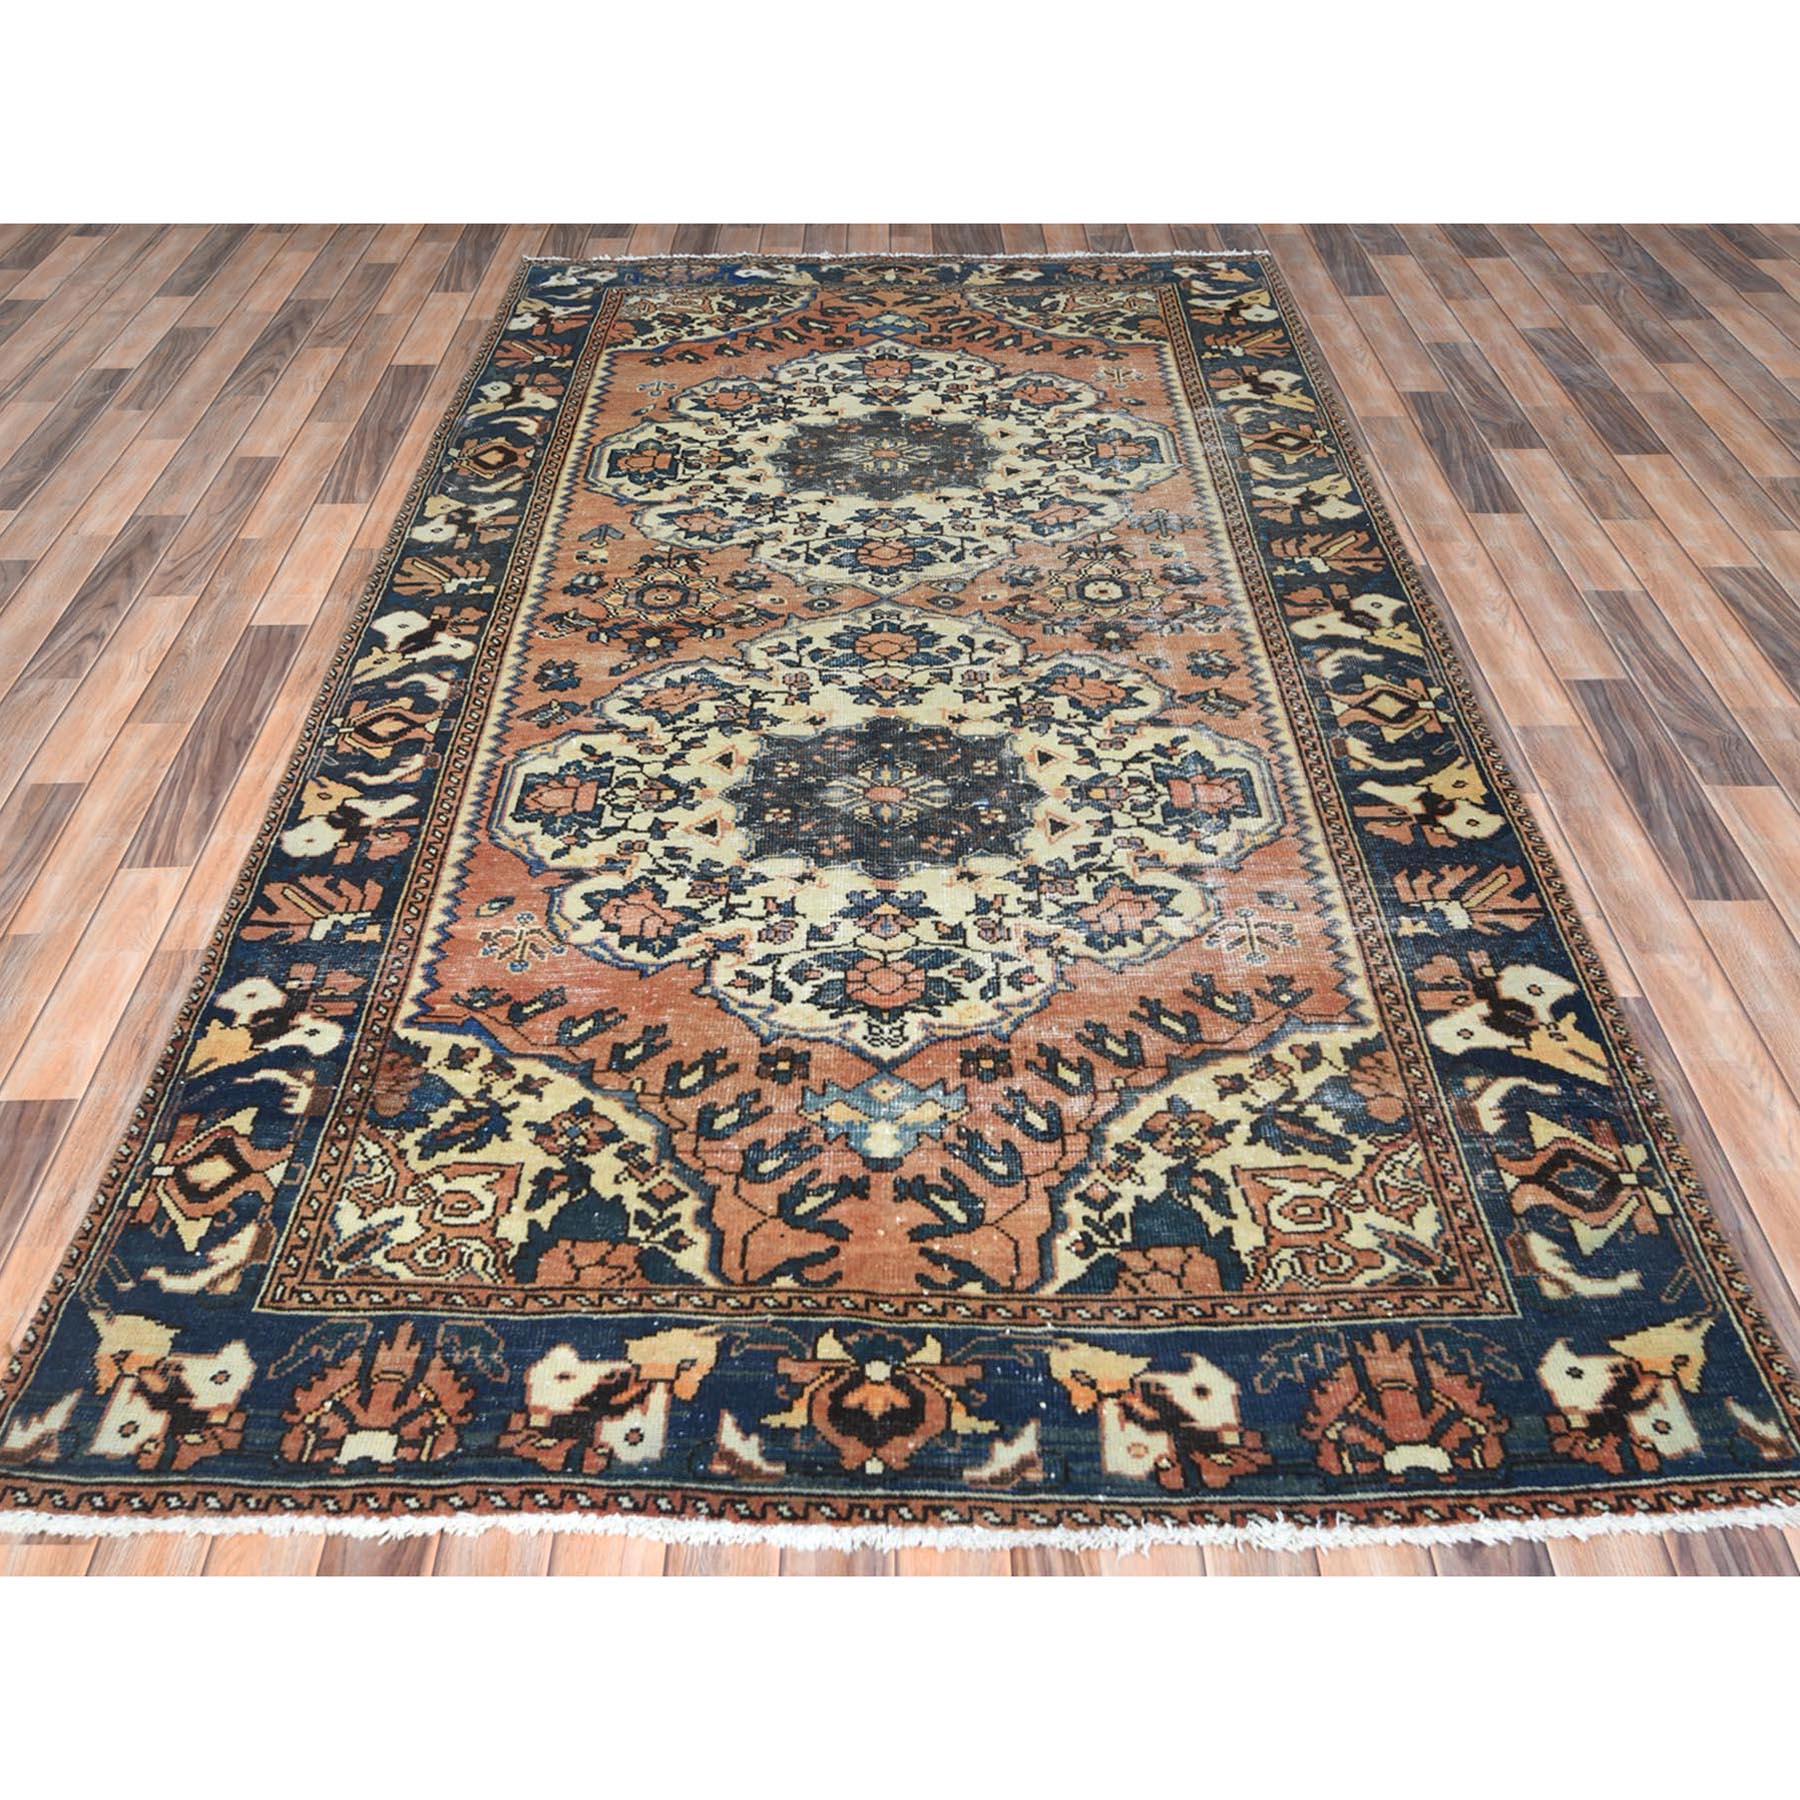 This fabulous Hand-Knotted carpet has been created and designed for extra strength and durability. This rug has been handcrafted for weeks in the traditional method that is used to make
Exact Rug Size in Feet and Inches : 5'4